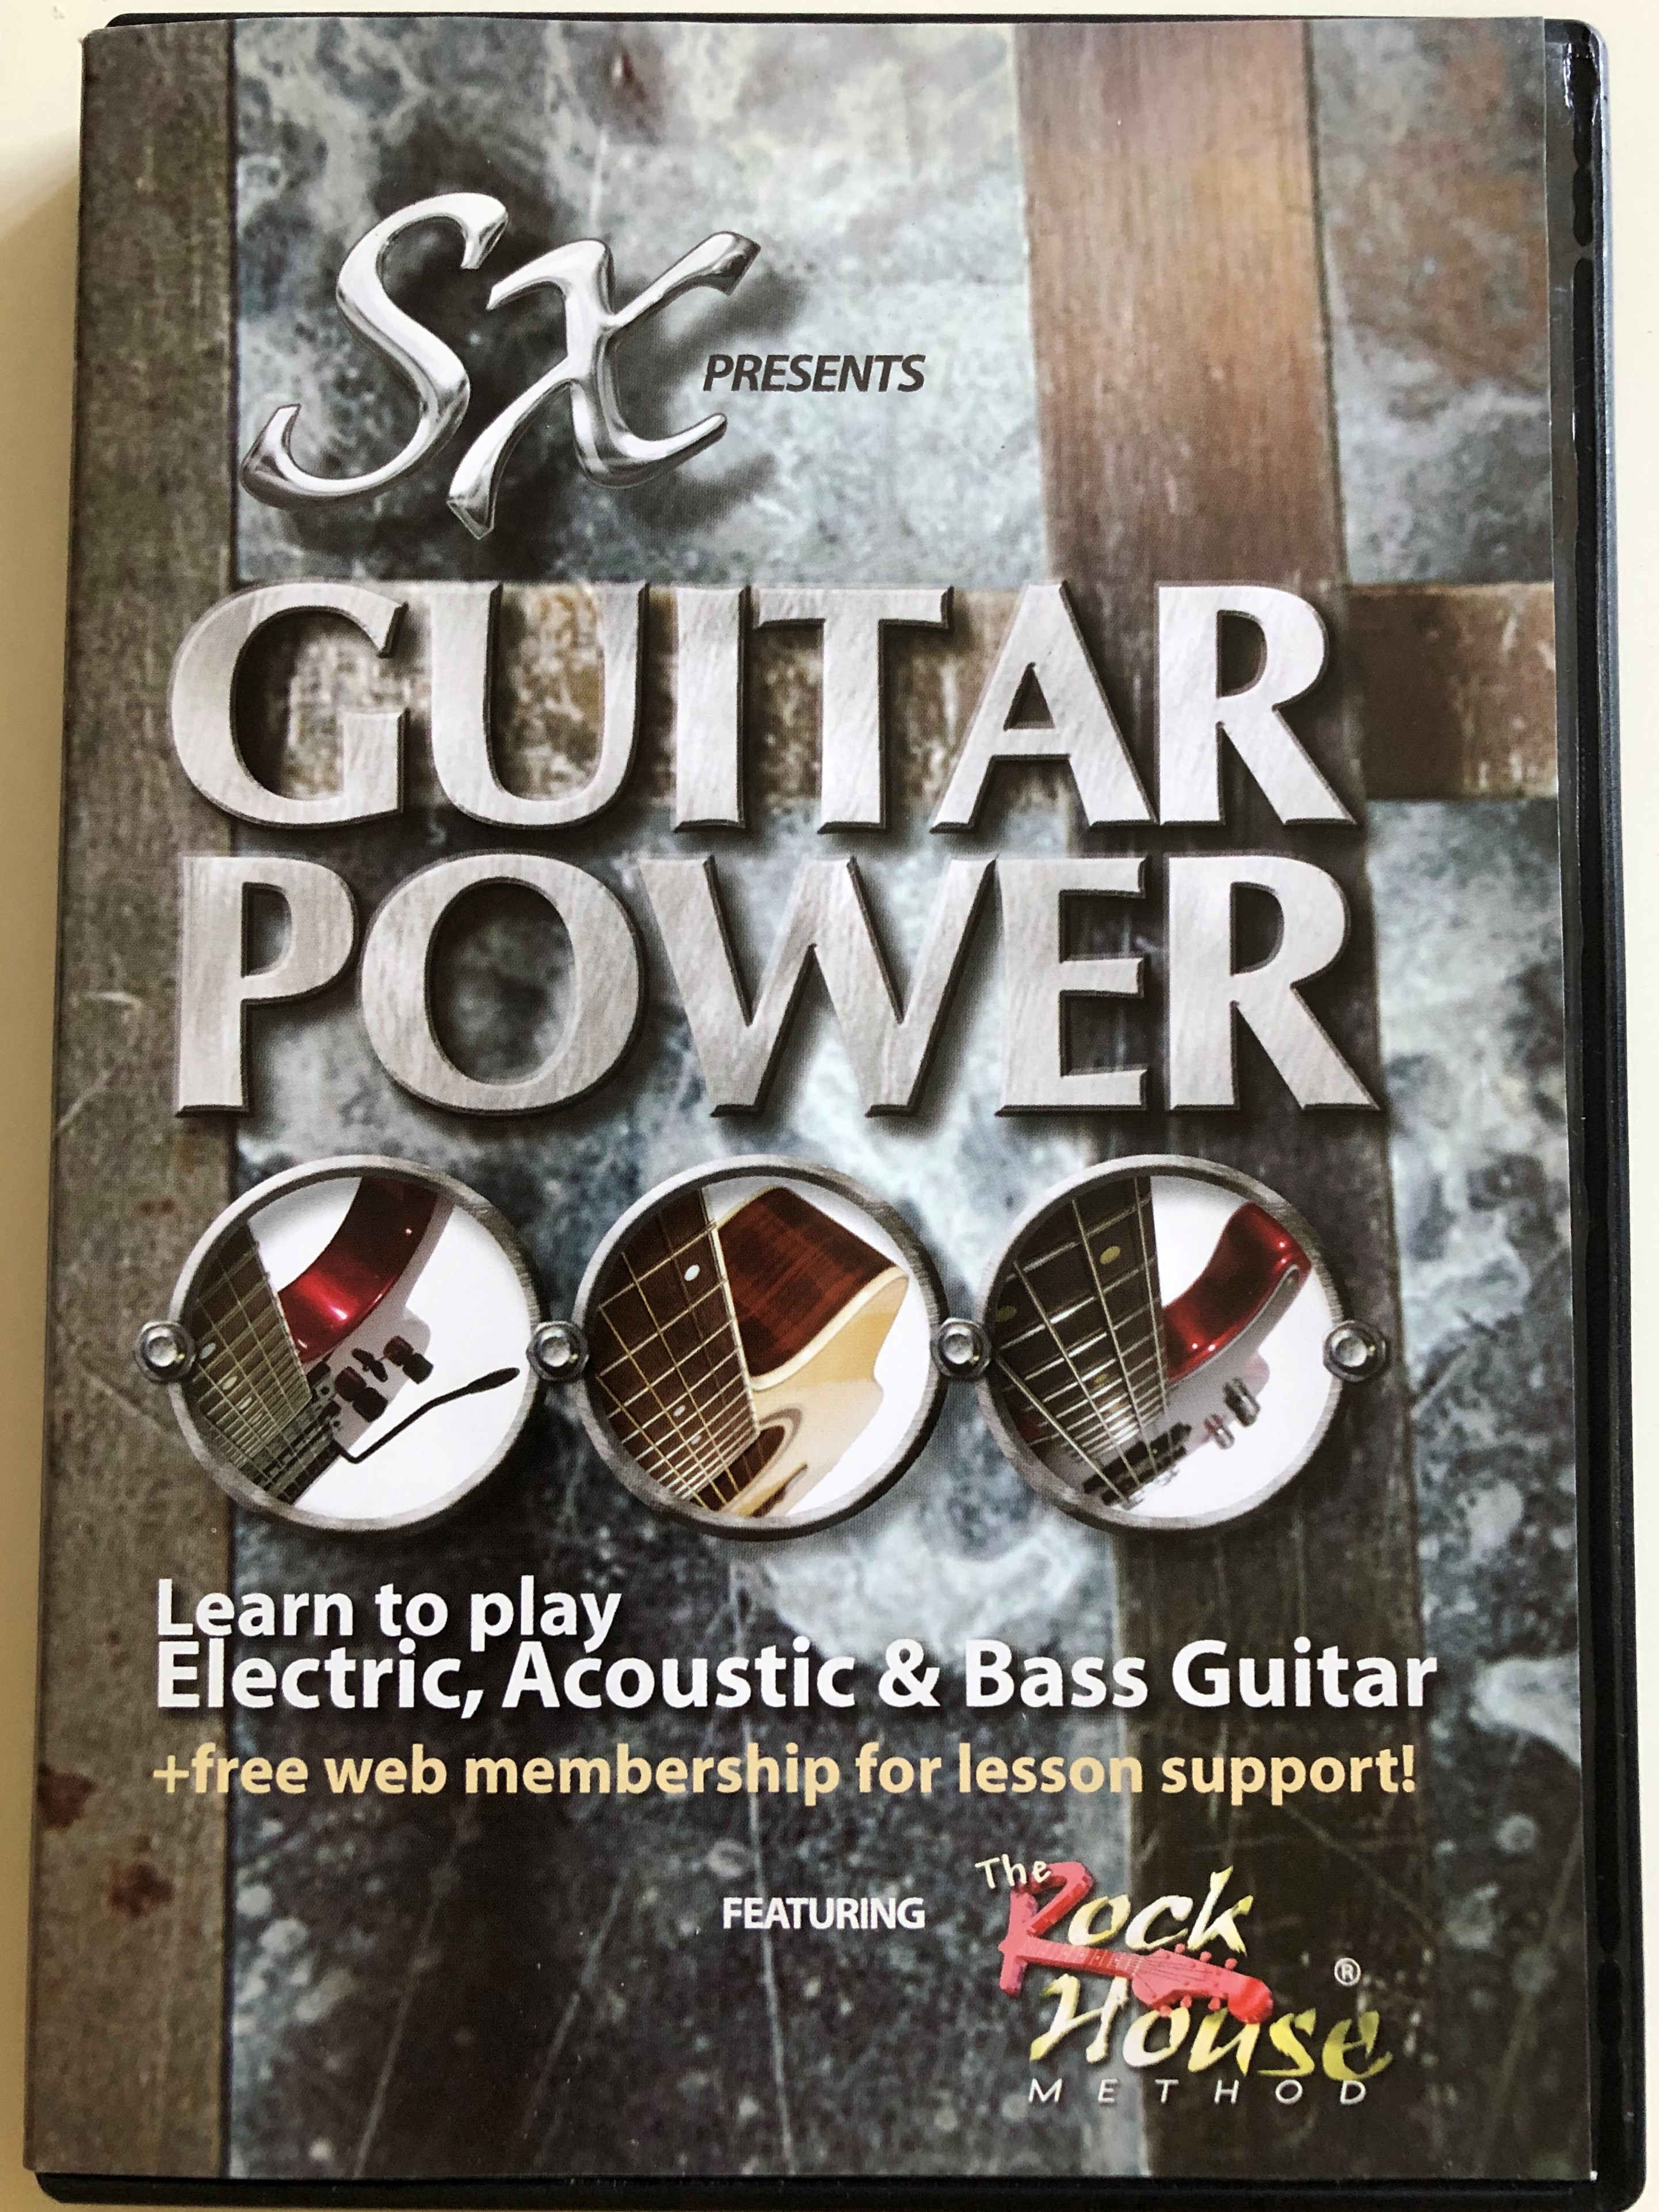 sx-presents-guitar-power-dvd-learn-to-play-electric-acoustic-bass-guitar-free-web-membership-for-lesson-support-featuring-the-rock-house-method-by-john-mccarthy-1-.jpg